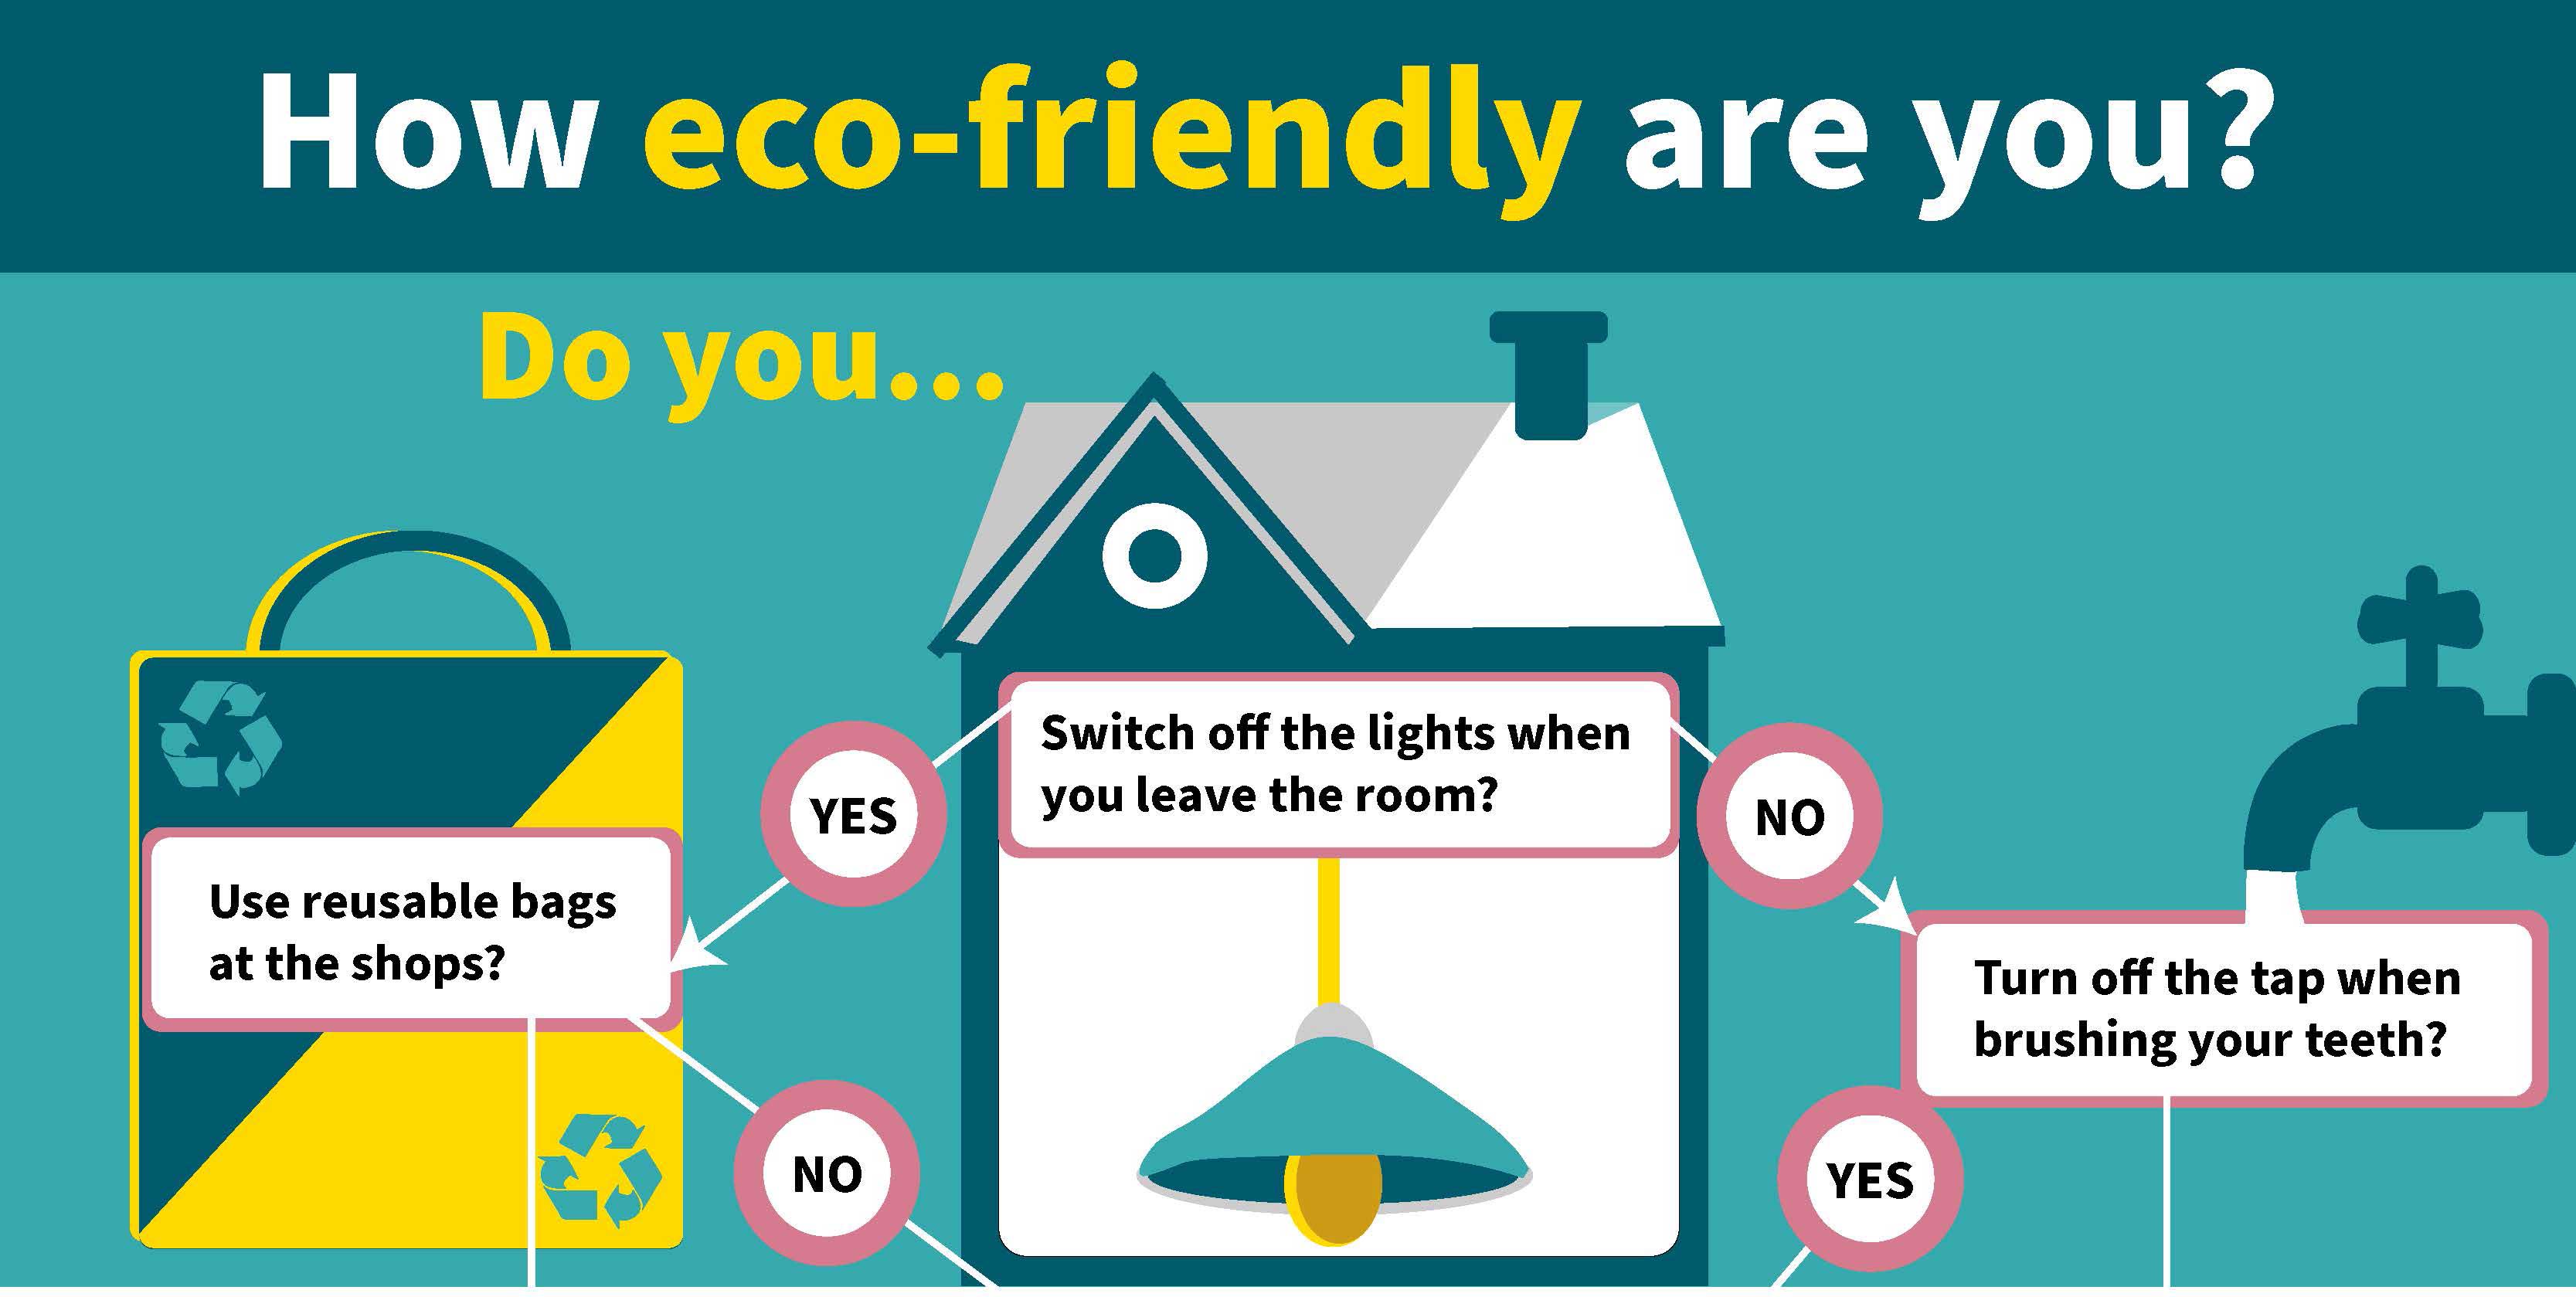 How eco-friendly are you infographic